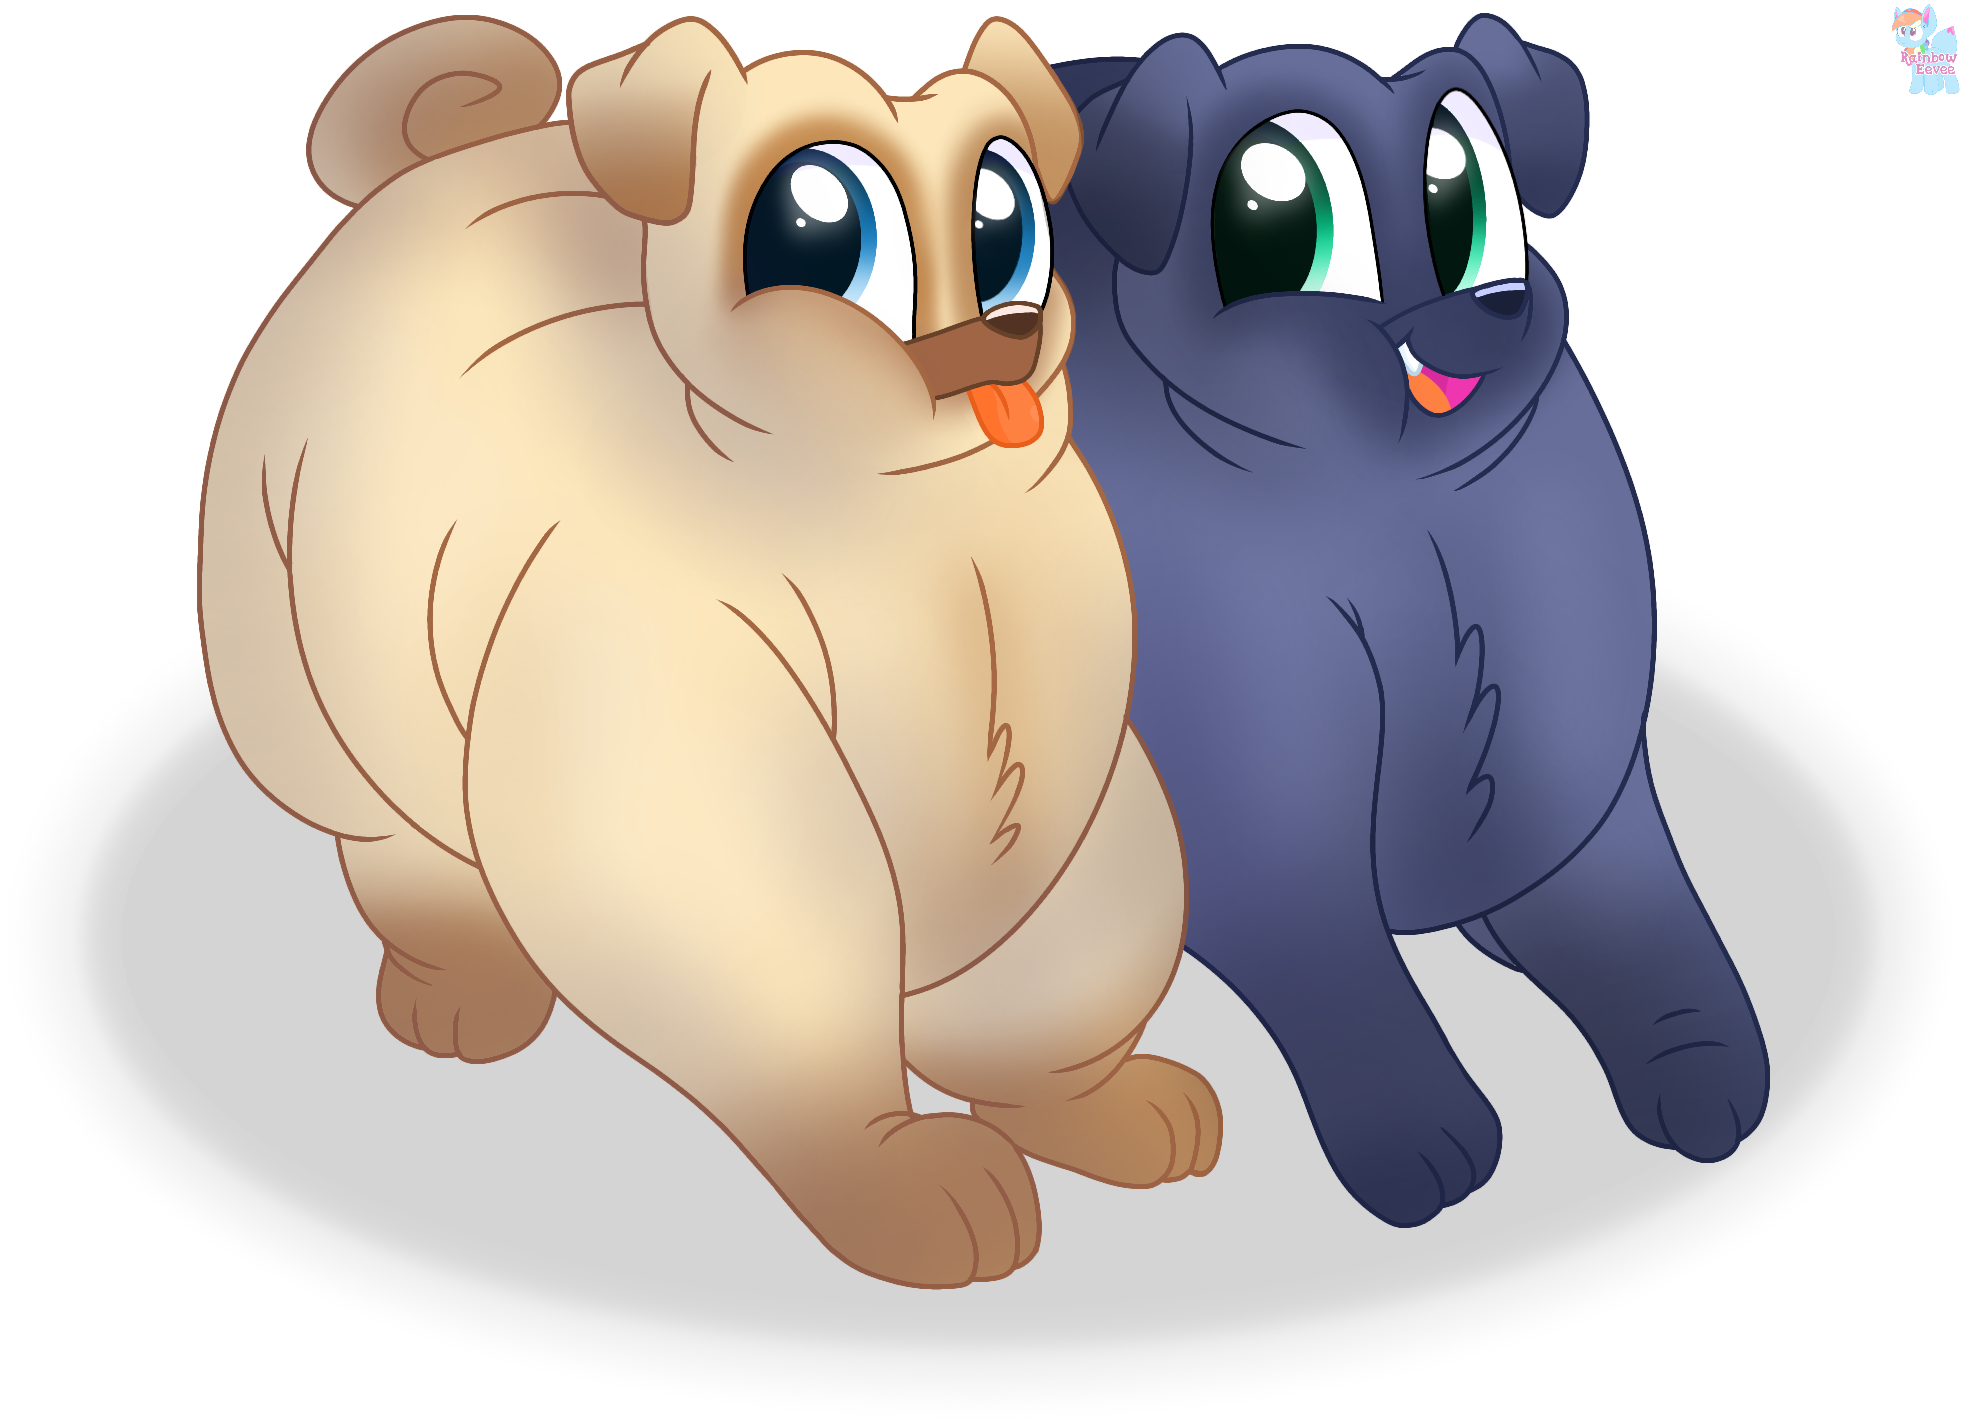 Obese and Fat Bingo and Rolly (Puppy Dog Pals) by RainbowEevee-DA on  DeviantArt